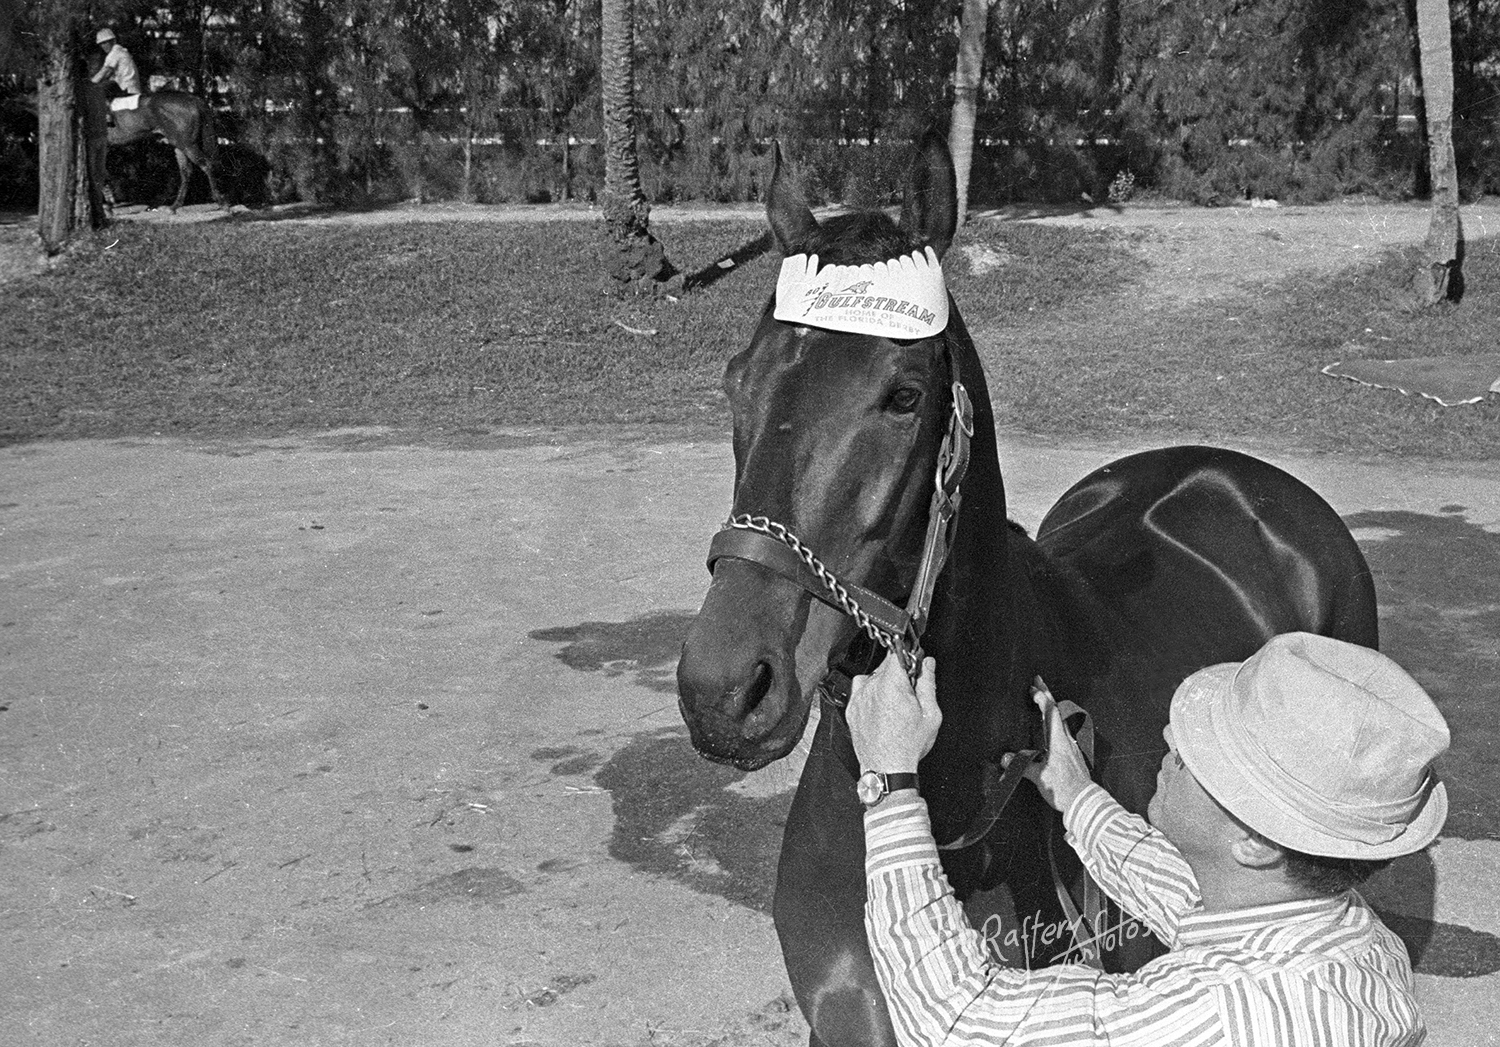 Gun Bow, champion, upon his arrival at Monmouth Park, March 10, 1965 (Jim Raftery Turfotos)